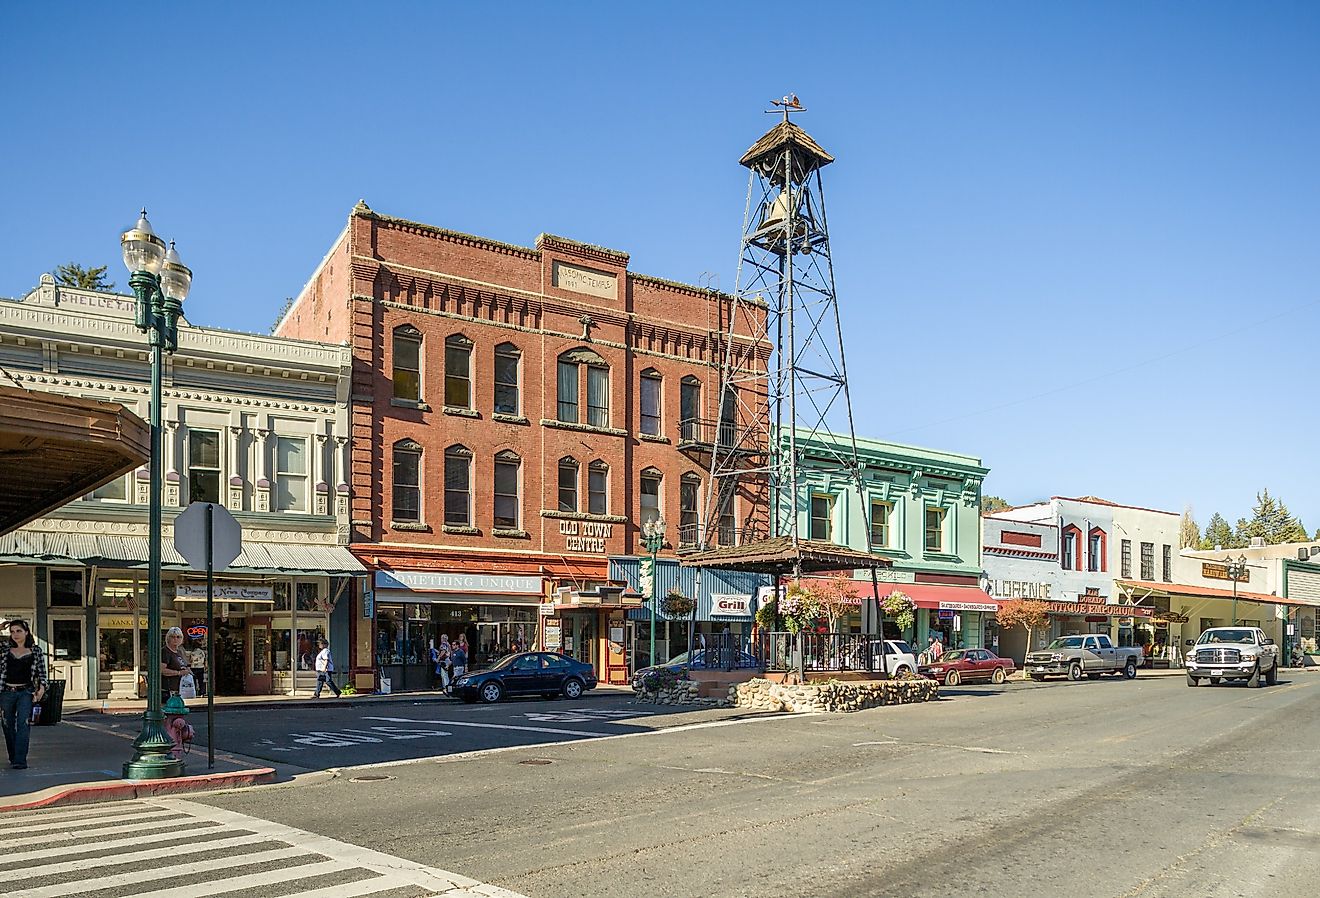 Historic Bell Tower Monument and Old Town Centre in Placerville, California. Image credit Laurens Hoddenbagh via Shutterstock